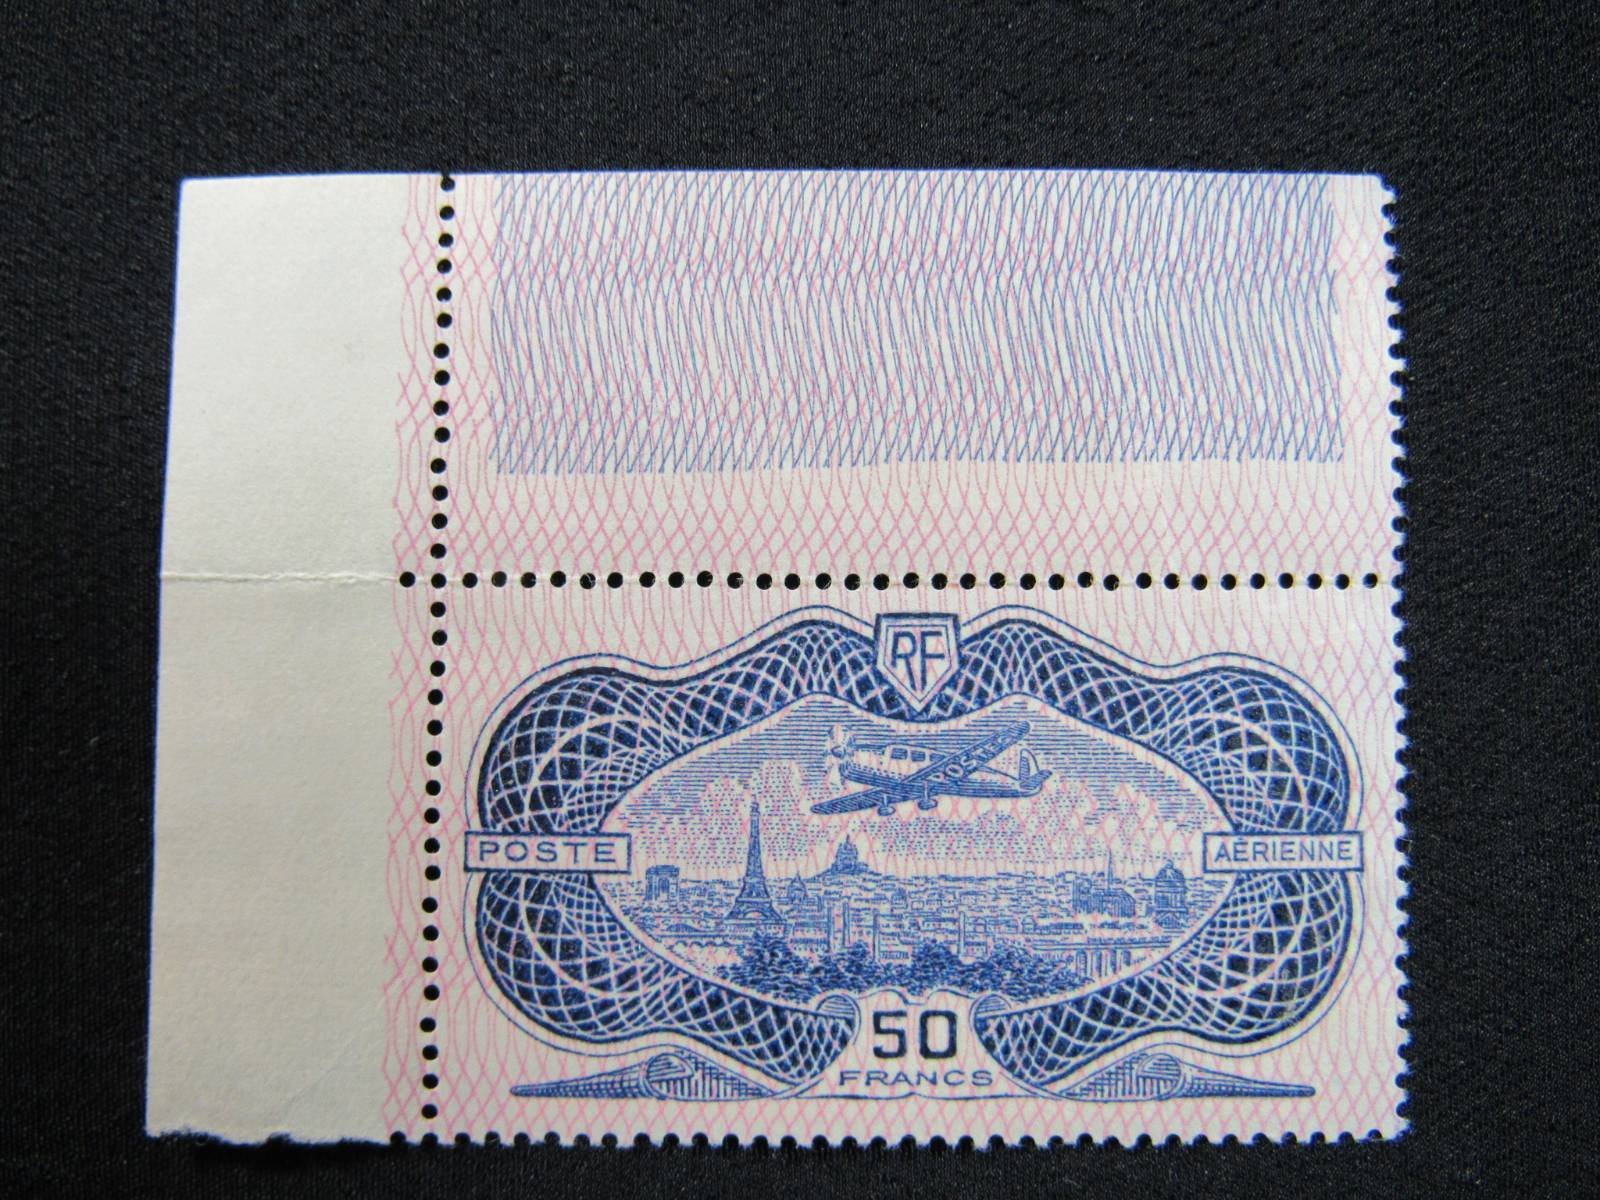 Superb Fresh France C15 MNH XF = $1,700 CV Corner Tabs

Auction ends: Saturday, May 11th at 8:25pm EST

View the auction and bid: https://www.ebay.com/itm/375406760449